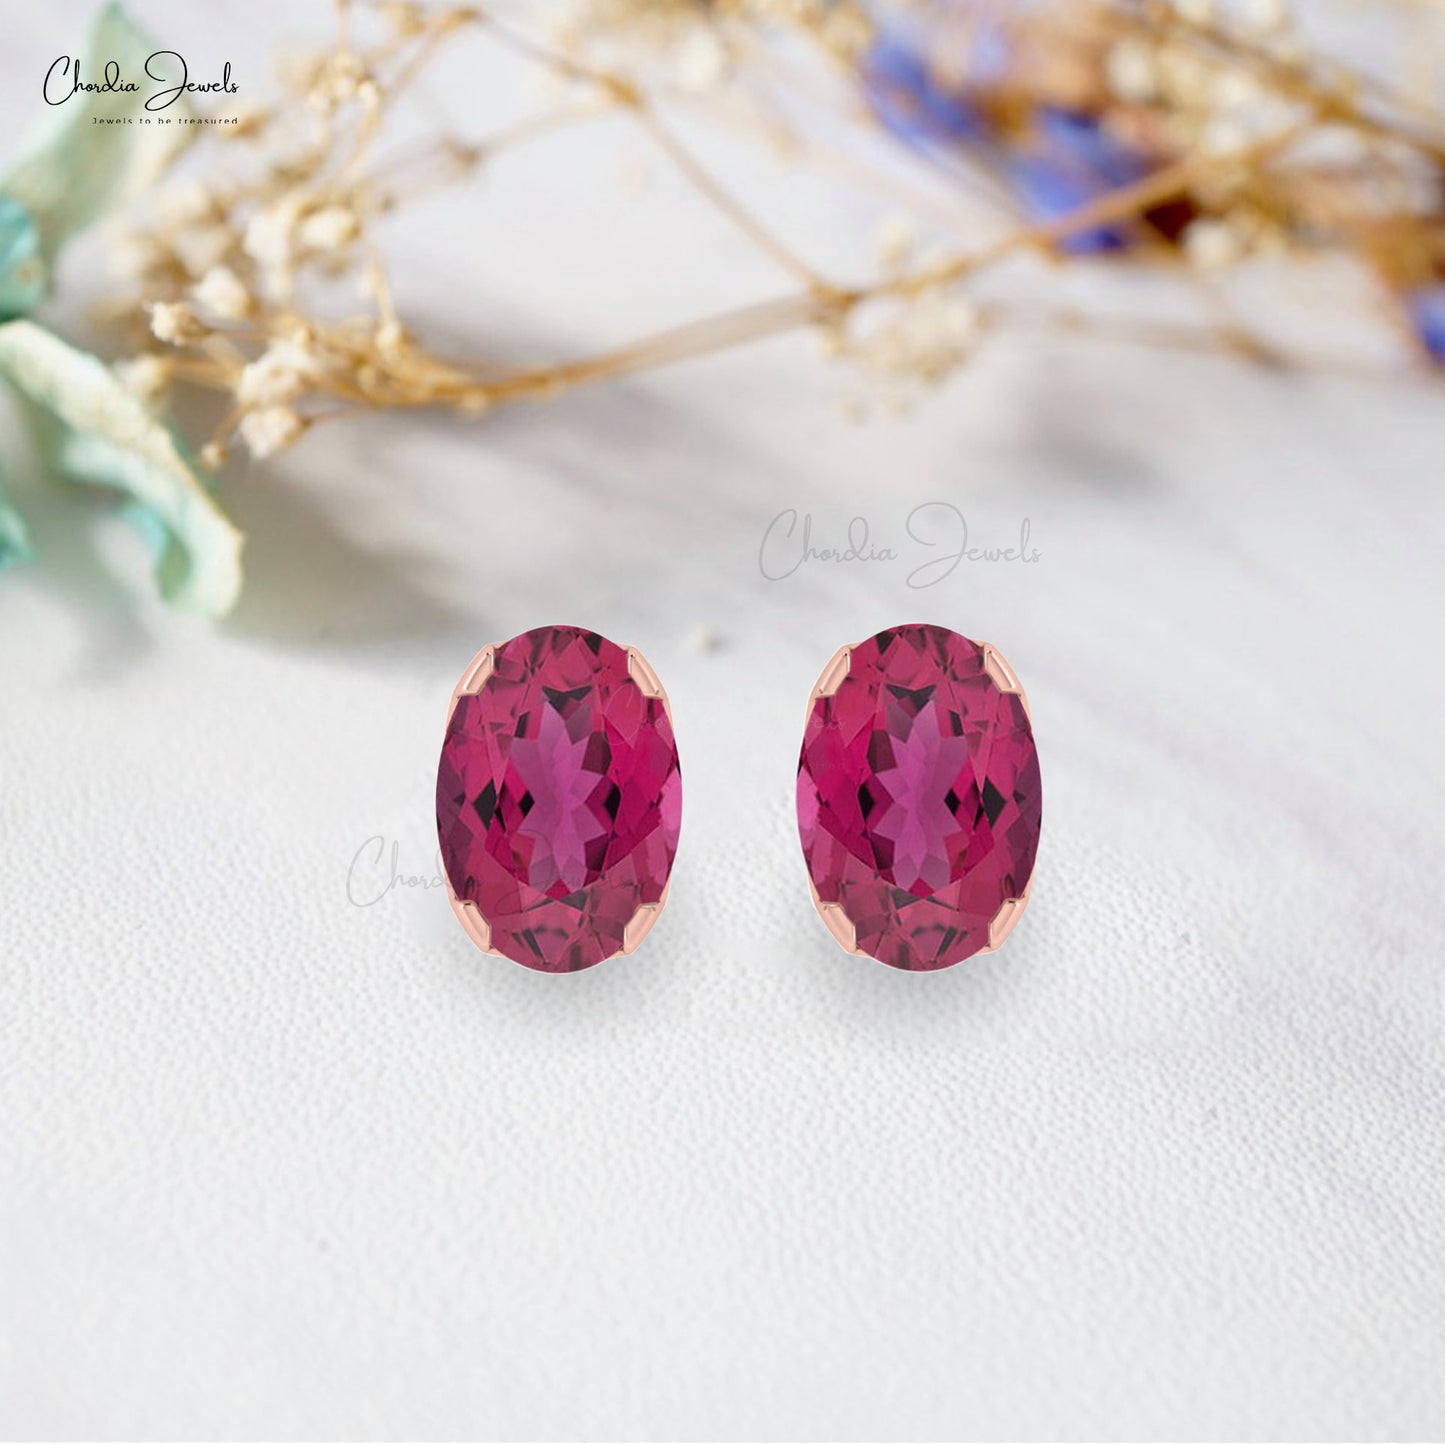 Load image into Gallery viewer, Genuine Pink Tourmaline Oval Cut Gemstone Studs Earring 14k Solid Gold Earrings For October Birthstone
